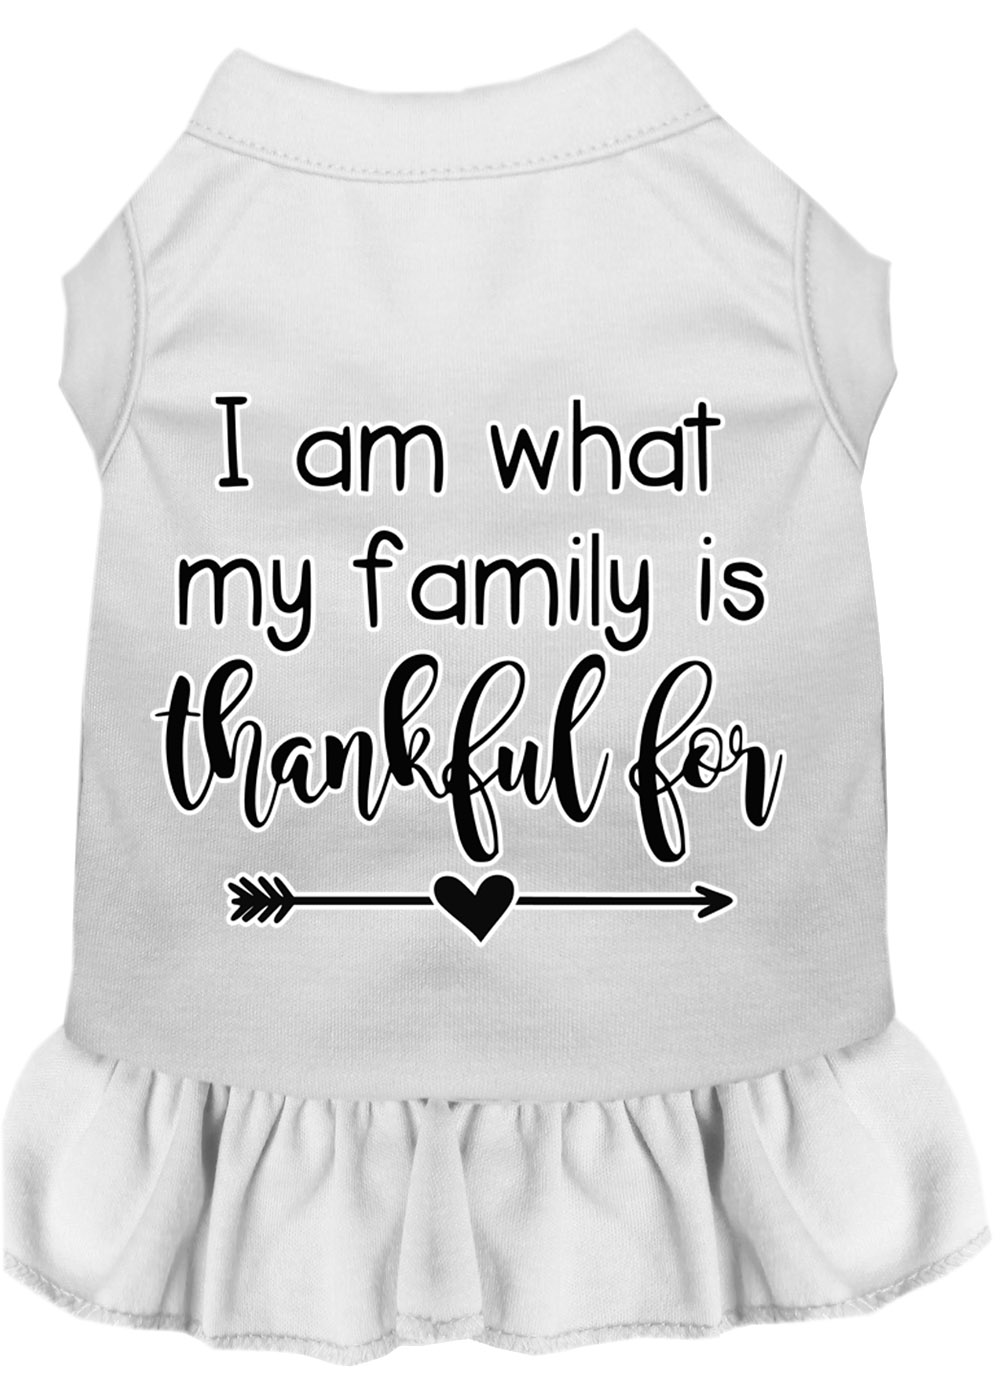 I Am What My Family is Thankful For Screen Print Dog Dress White XXL